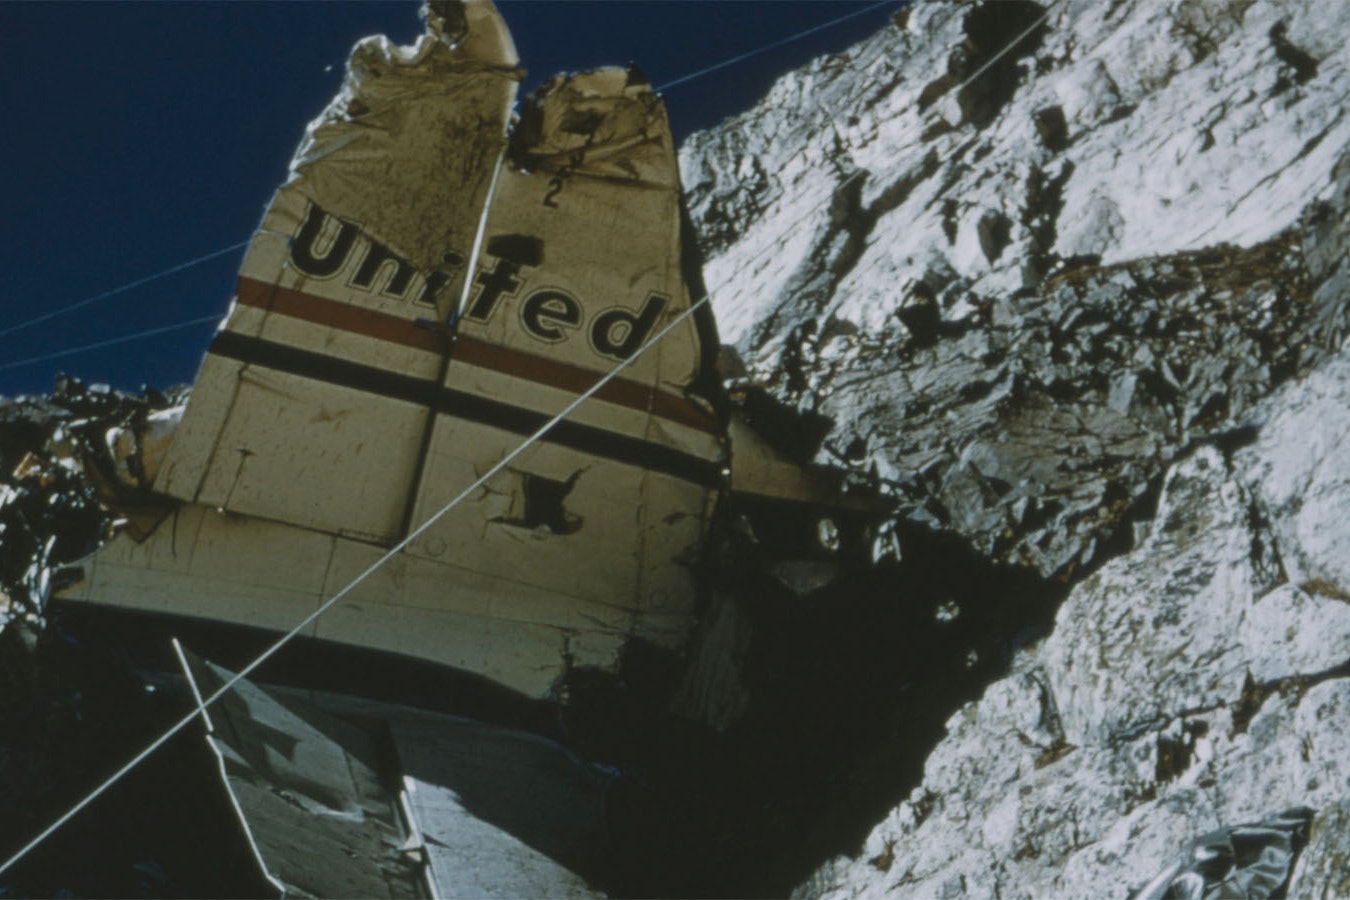 Part of the tail assembly from United Airlines Flight 409 that crashed on Medicine Bow Peak on Oct. 5, 1955.